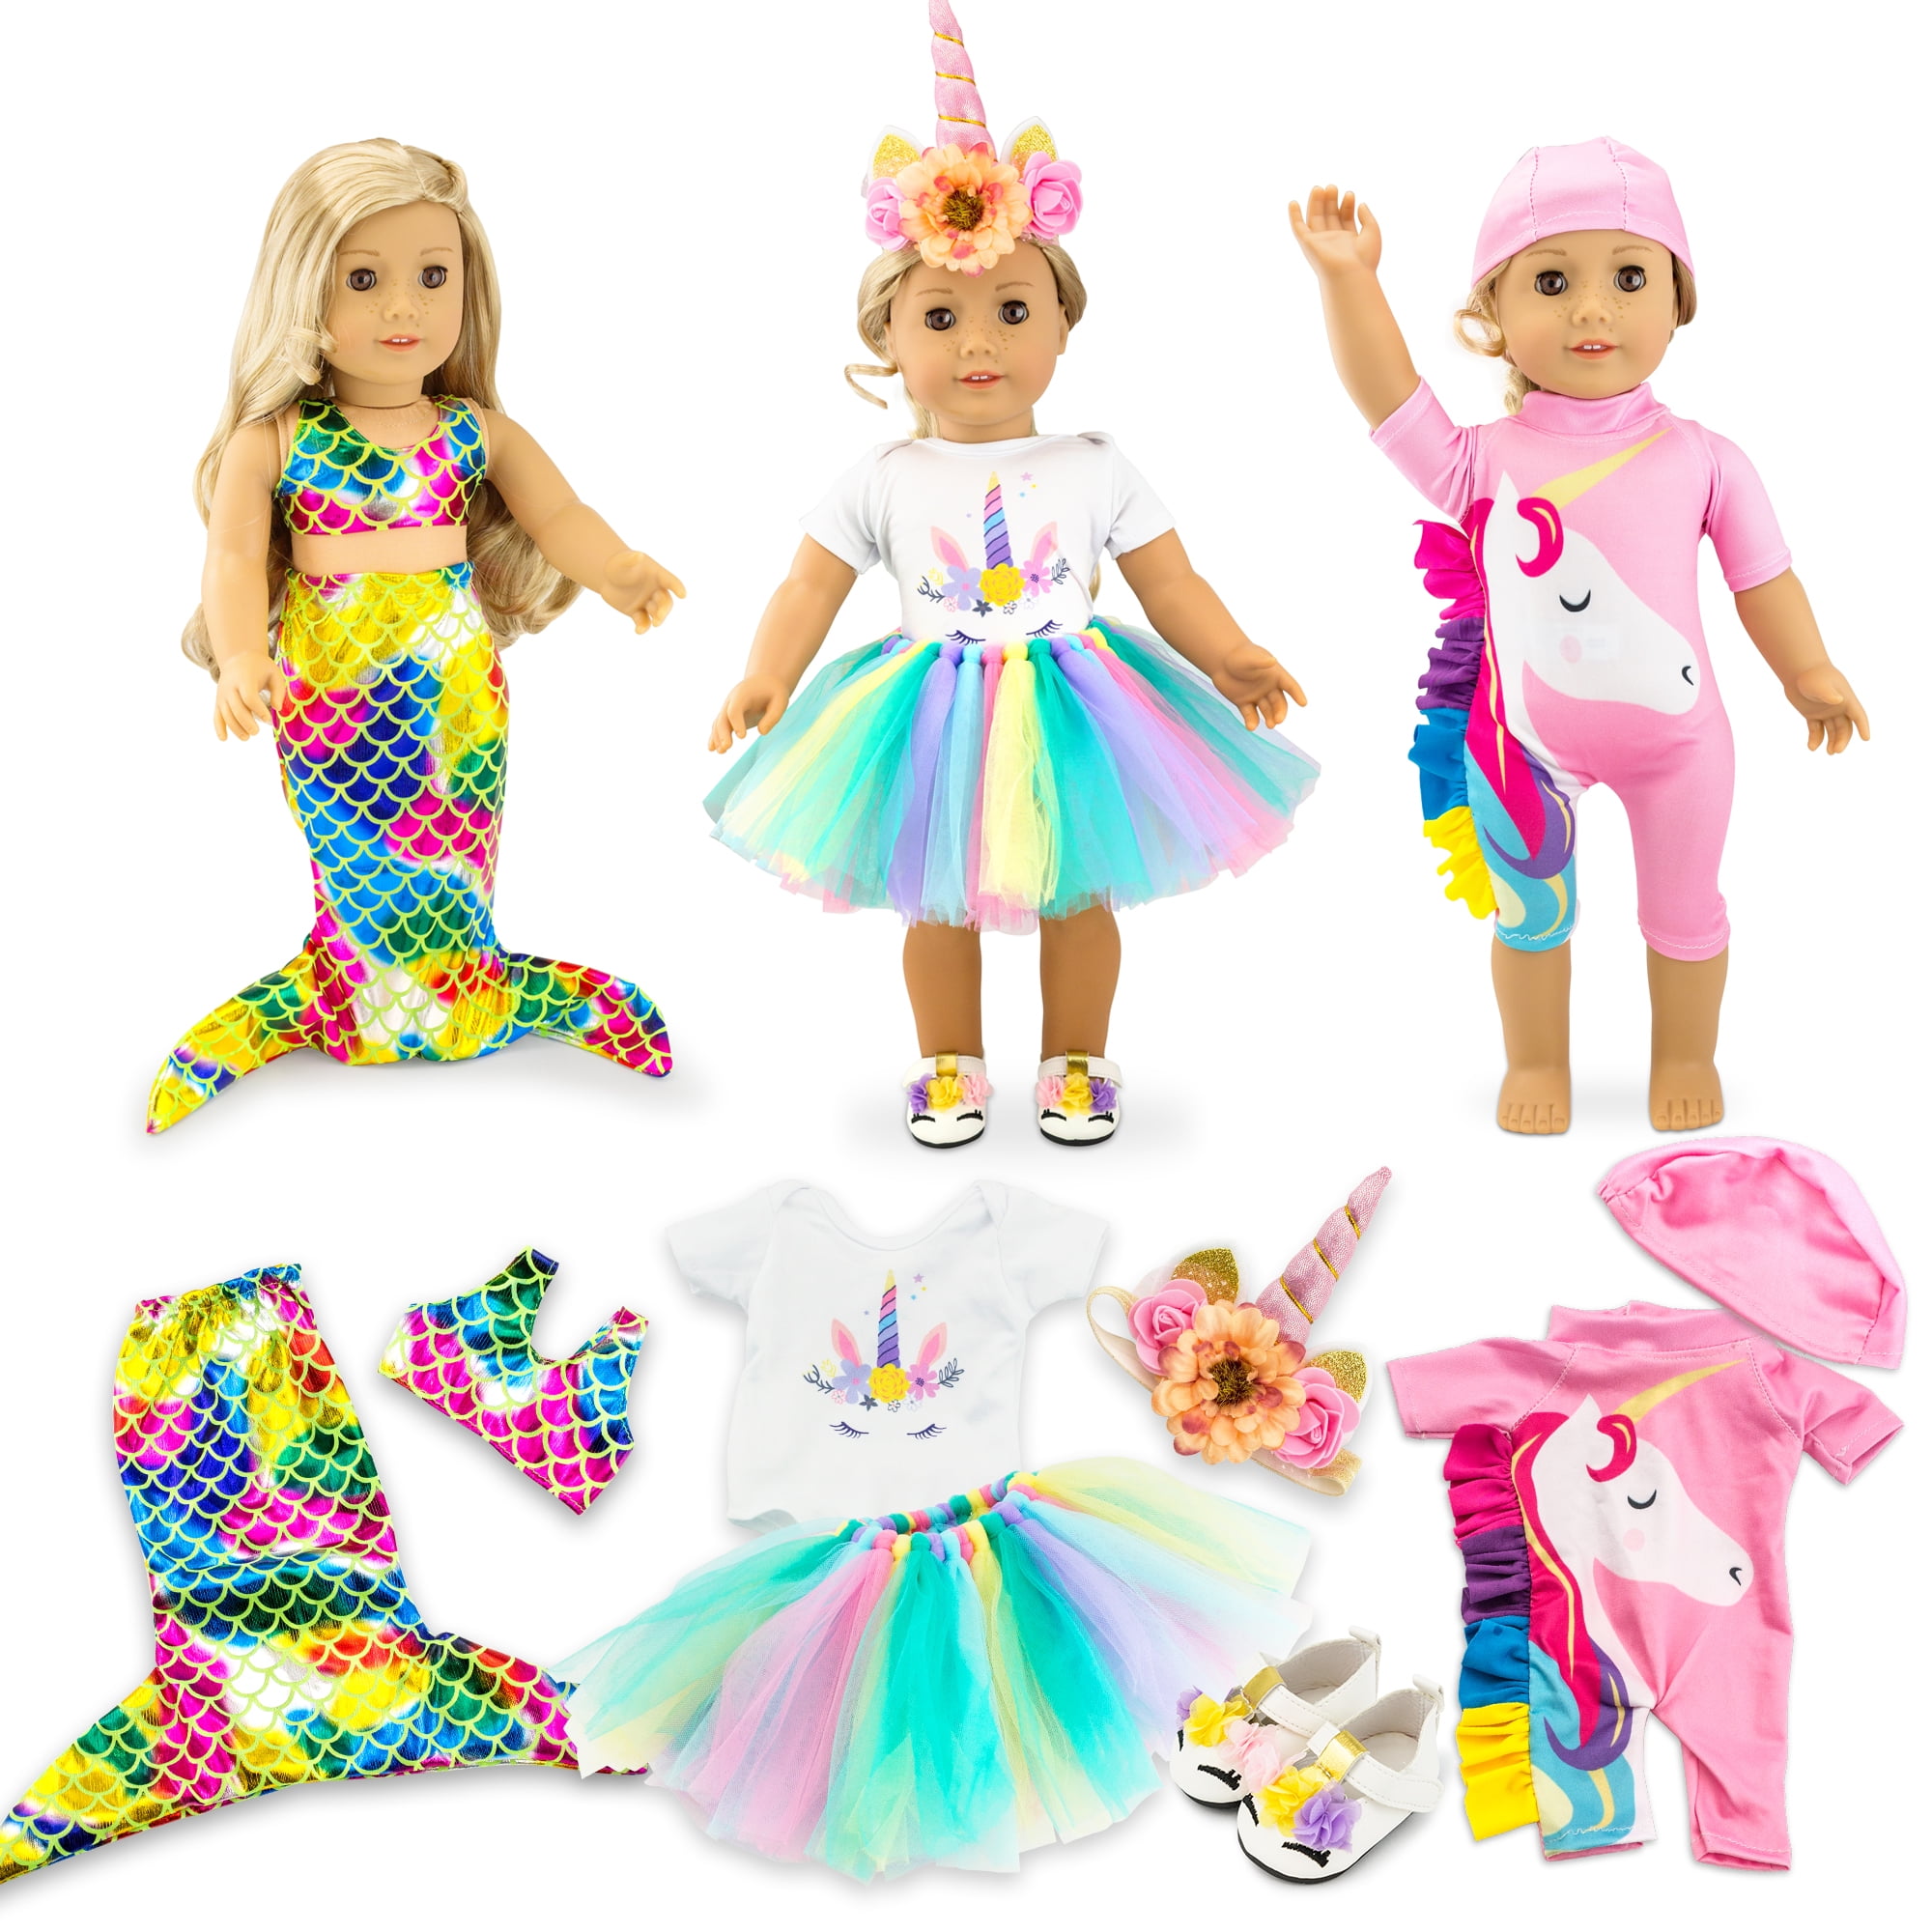 Details about   Colorful Unicorn Top & Skirt Outfit fits American Girl dolls 18" Doll Clothes 